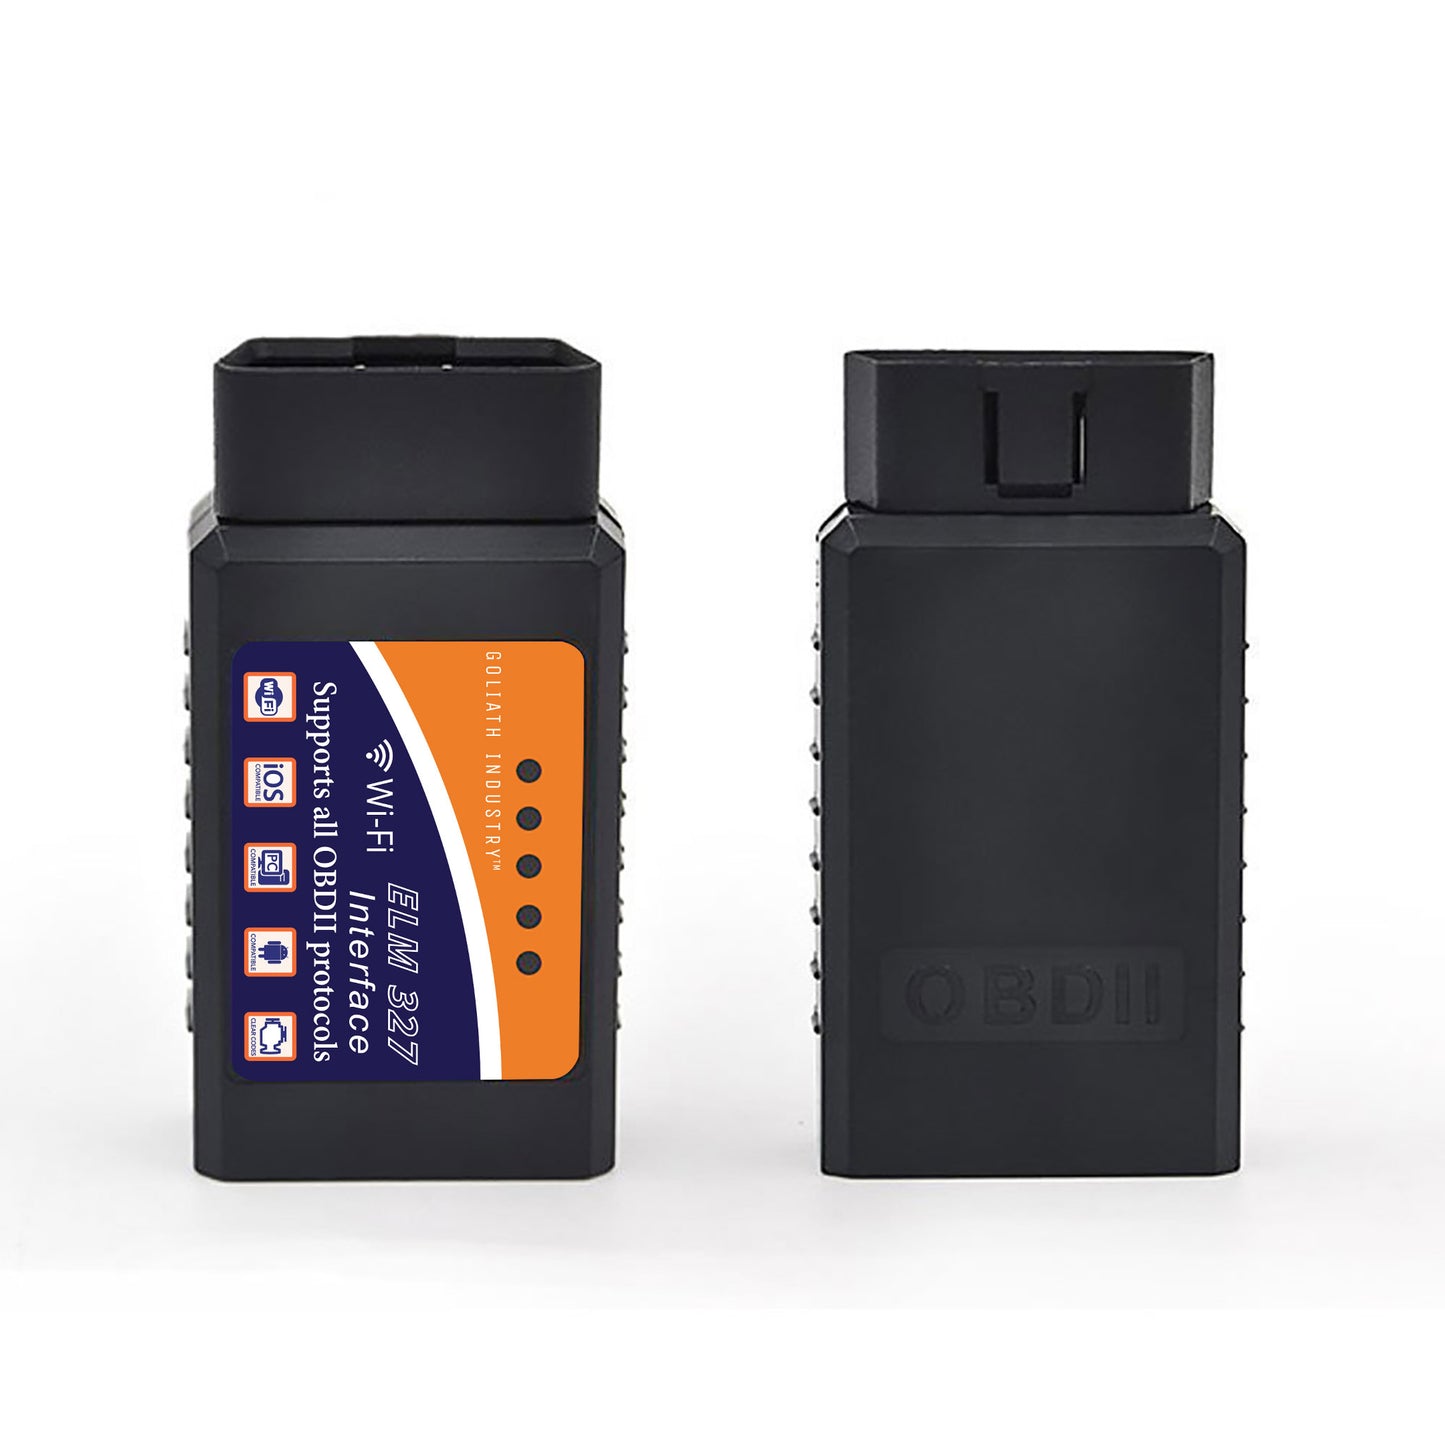 KOBRA Wireless OBD2 Car Code Reader Scan Tool OBD Scanner Connects Via WiFi With IOS, Android & Windows Device, Features 3000 Code Database, For Most Vehicles In the USA! Diagnose Your Car Like a Pro!